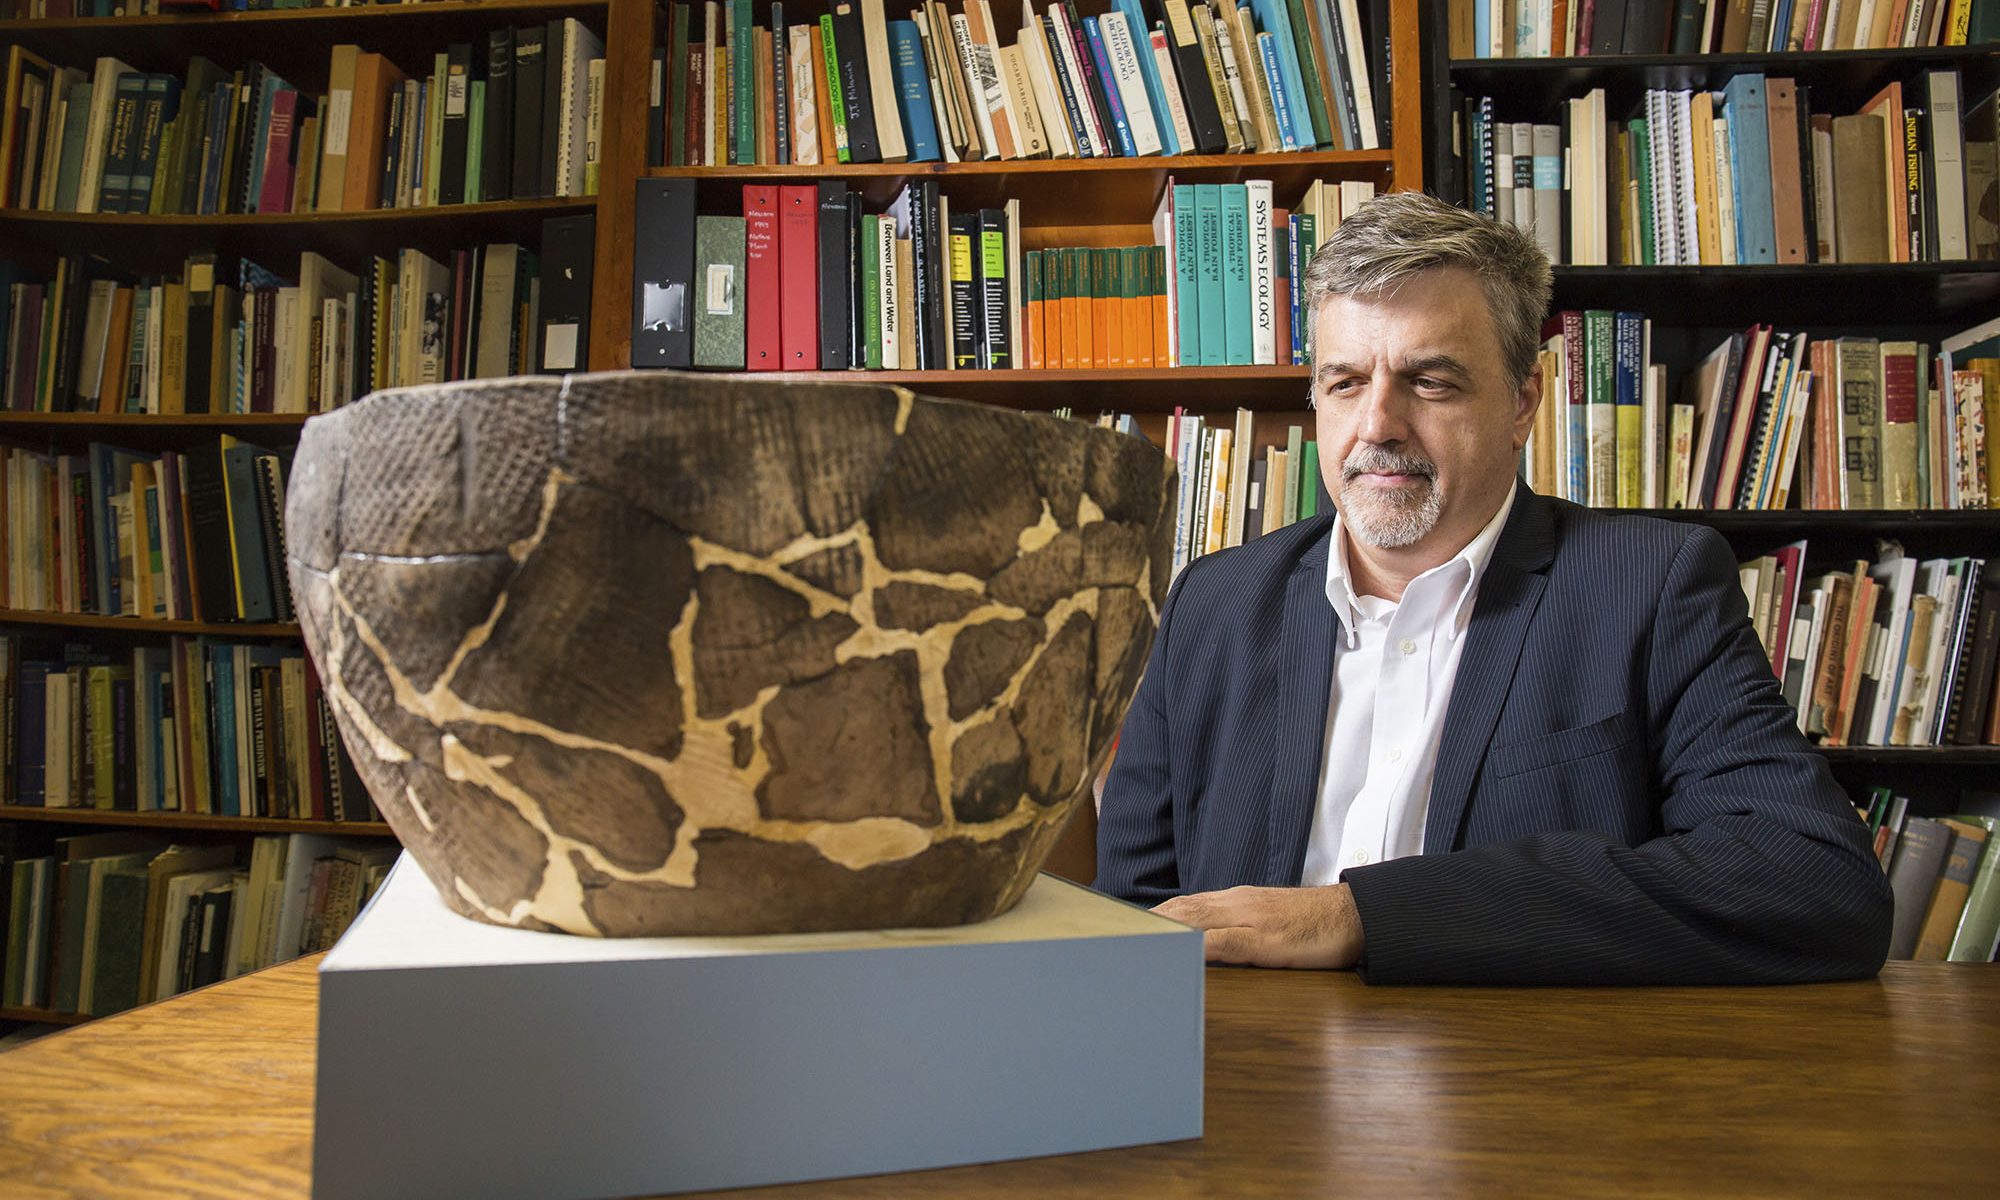 Aaron Broadwell sits in study with large artifact on table in front of him